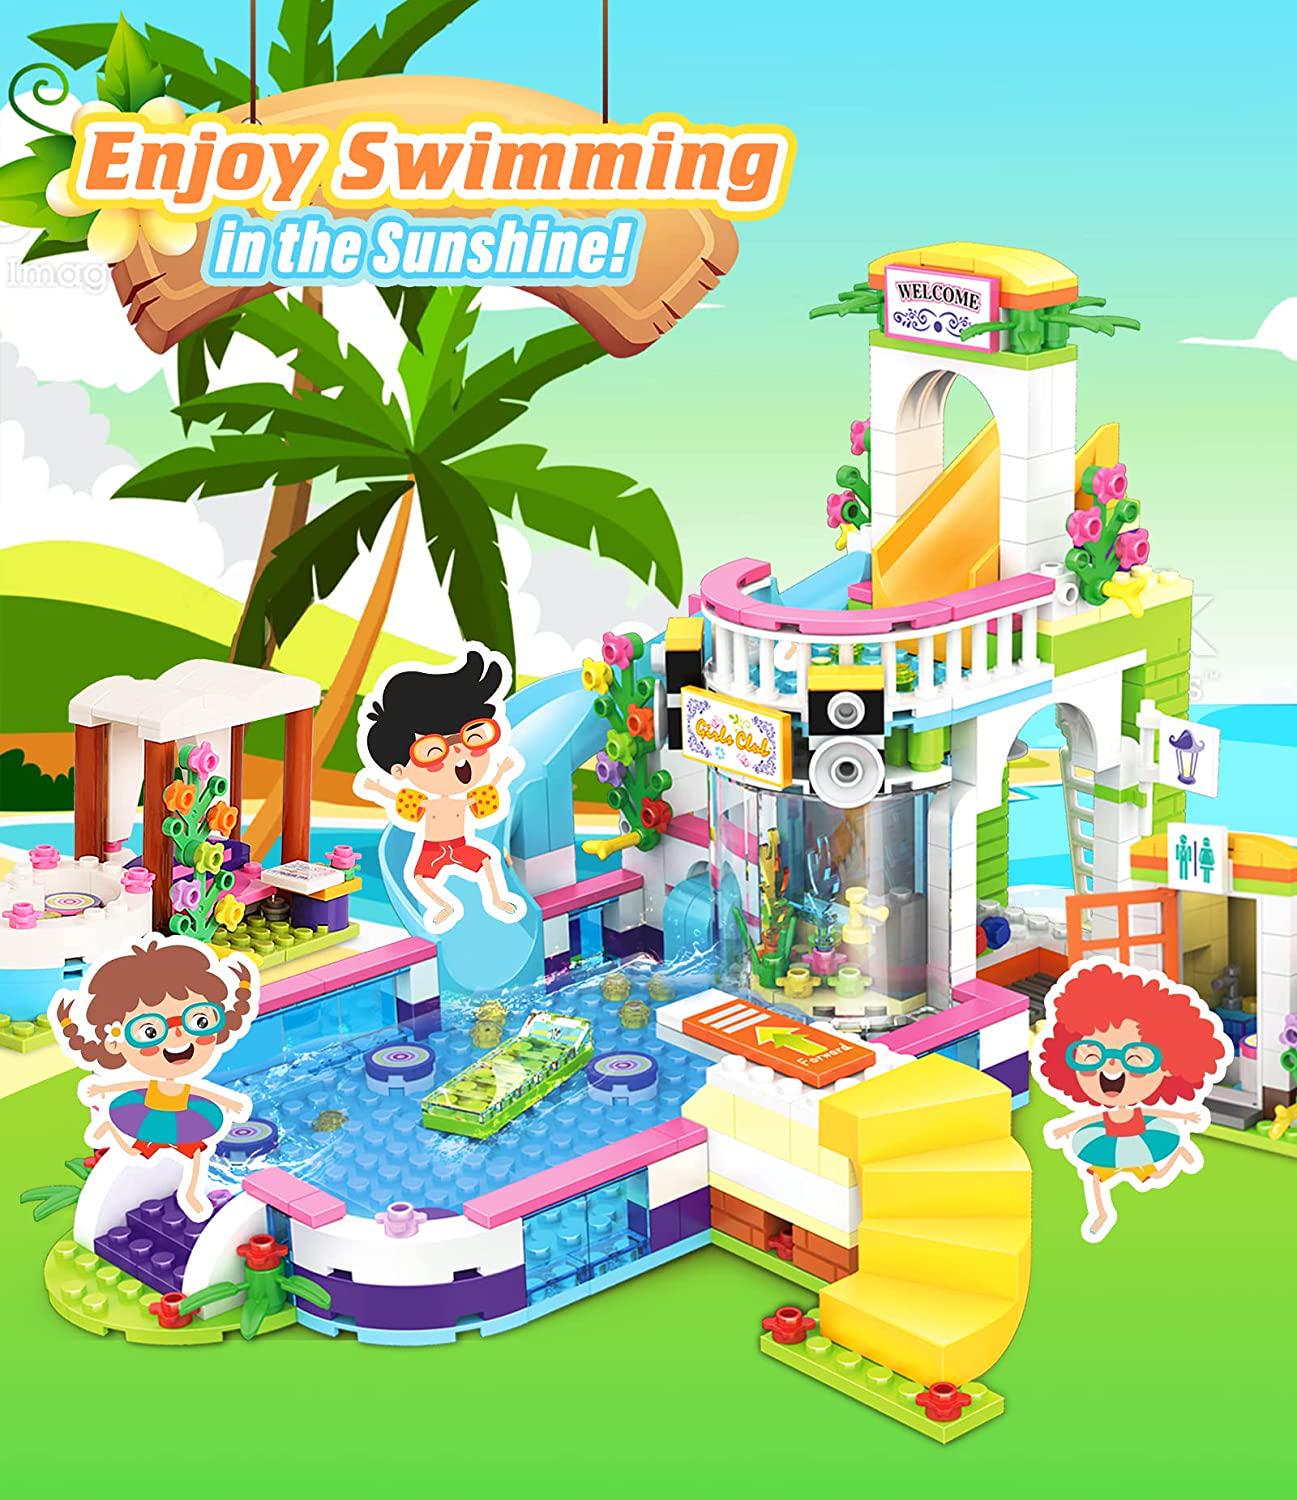 EP EXERCISE N PLAY, Friends Summer Pool Party Toy Pool Building Set for Girls 6-12, 1373 Pieces Hair Salon Creative Building Bricks Blocks Kit, STEM Learning and Roleplay Gift Pretend Play for Girl and Boy w/ Storage Box